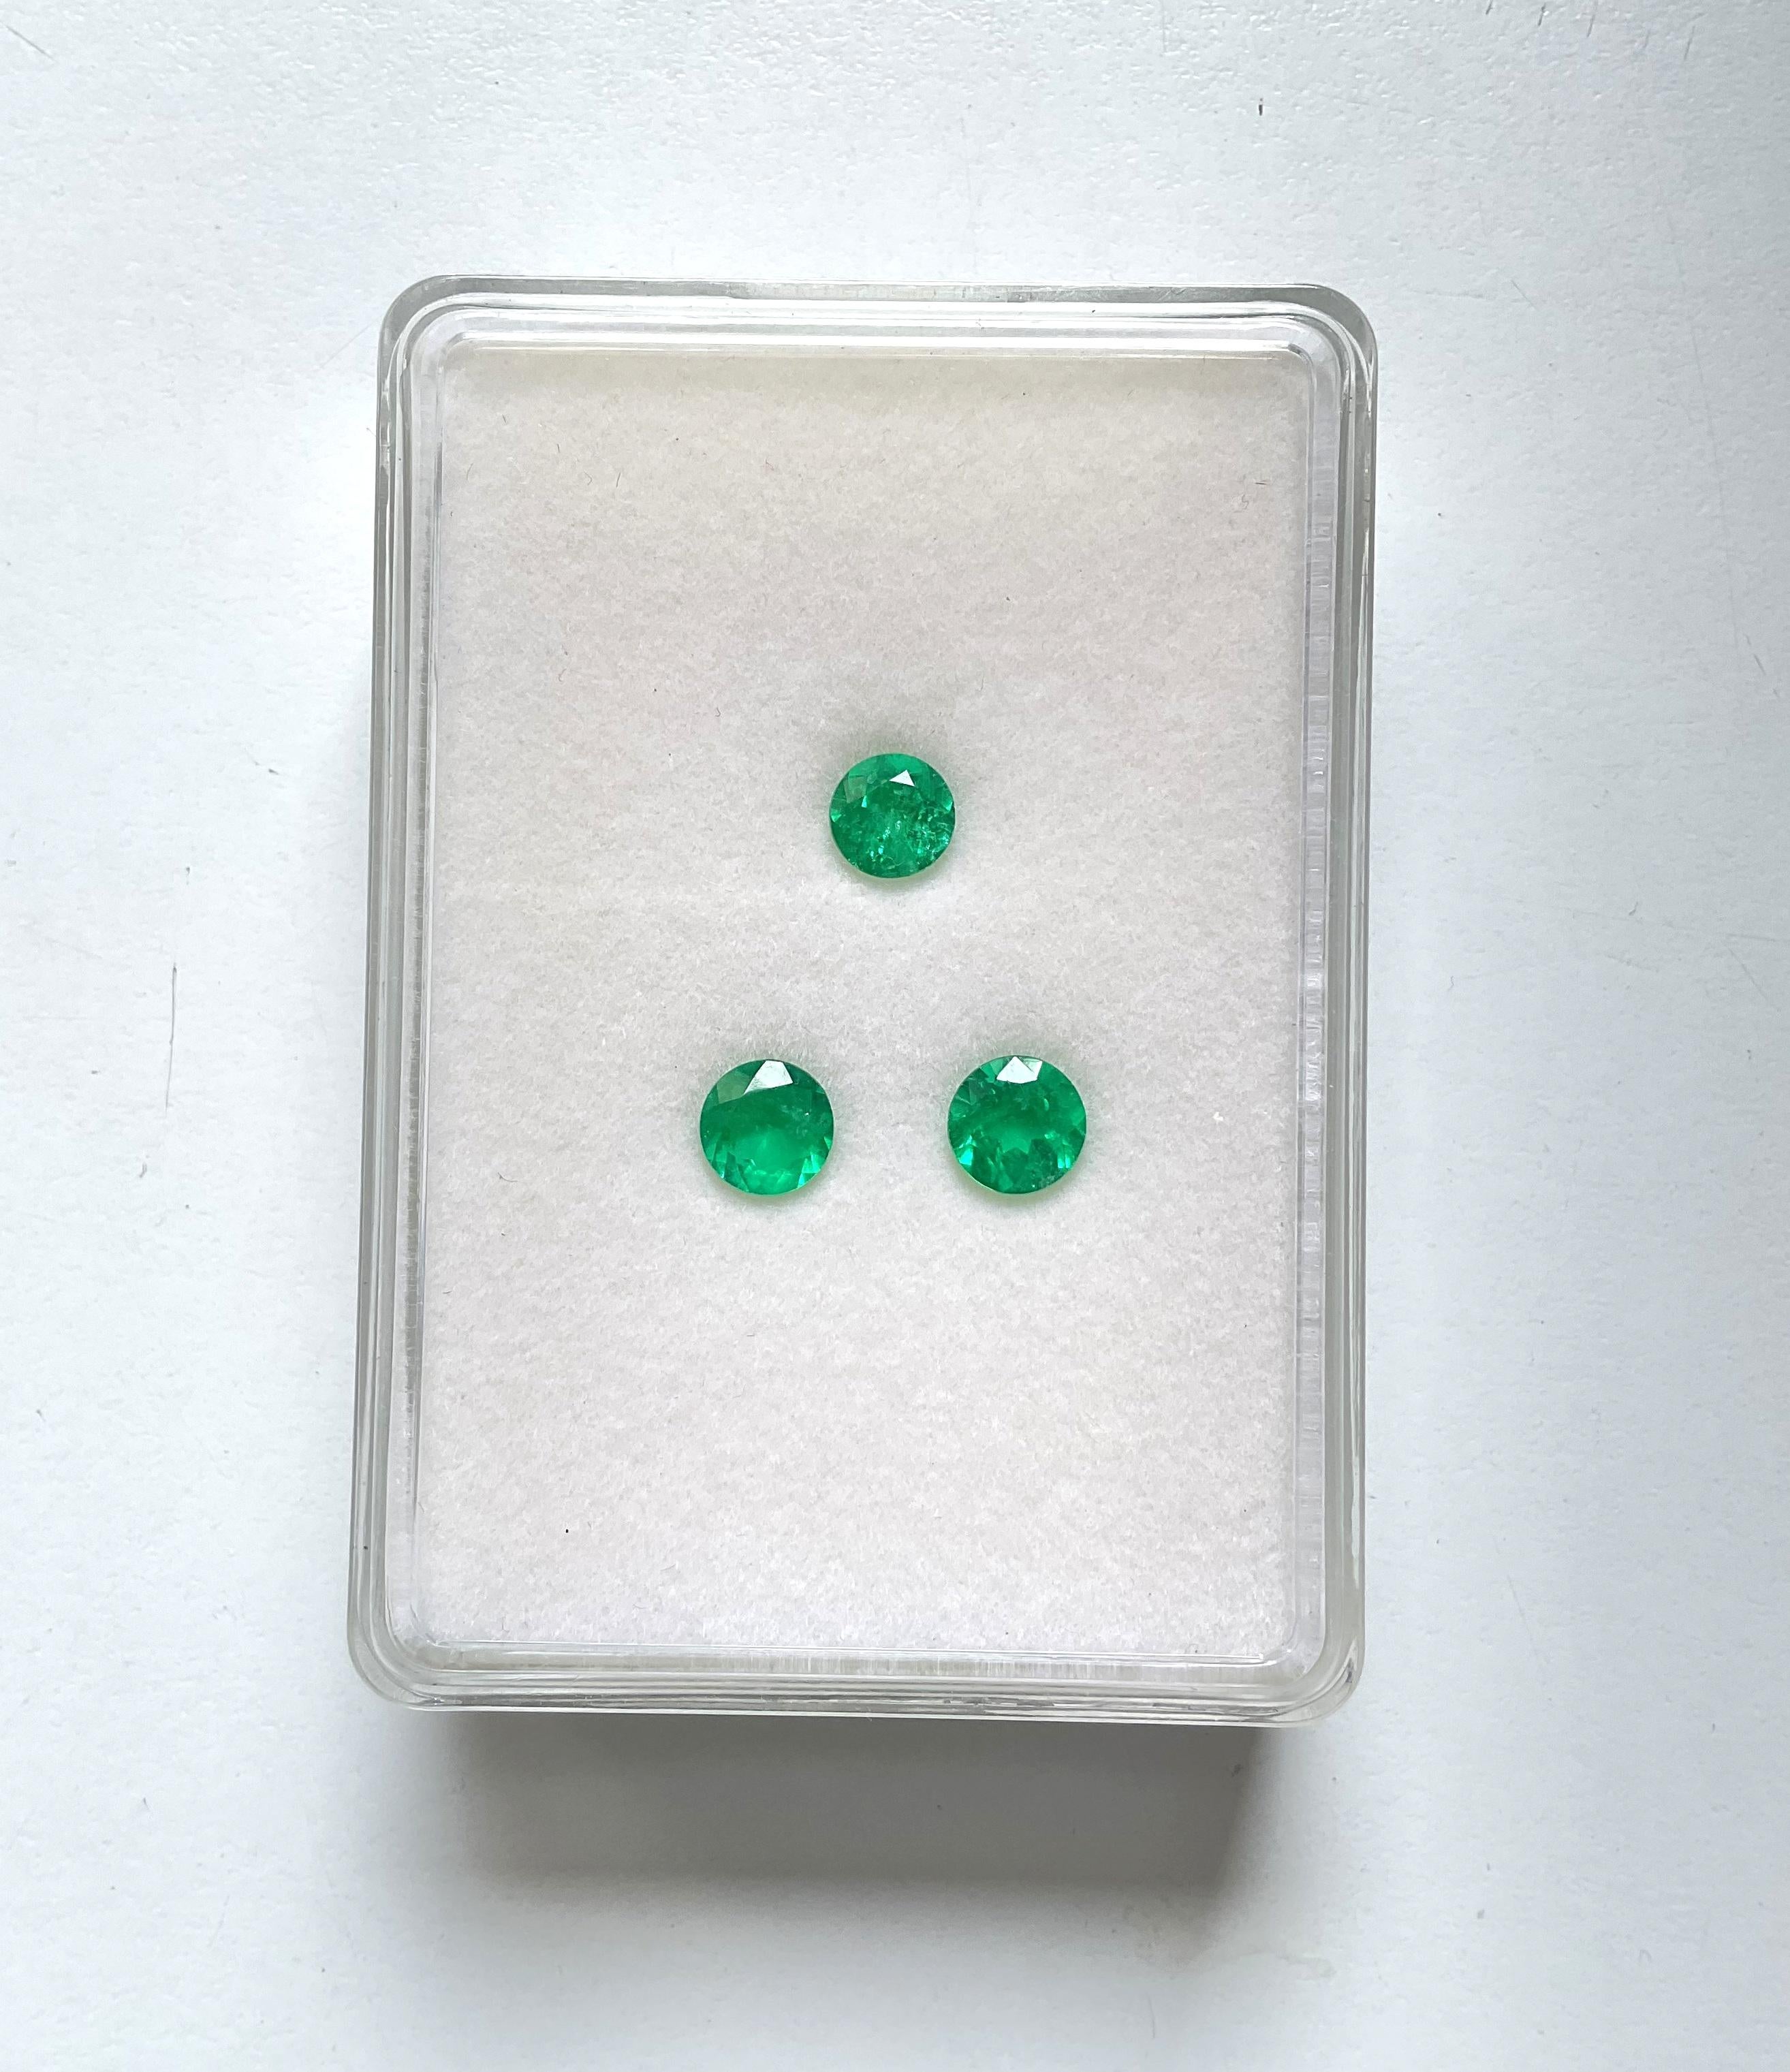 5.04 carats Colombian emerald round cut stone pair set for fine jewelry natural 

Gemstone - Emerald 
Weight - pair - 3.52 carats / 2 pieces - 8 mm
single pieces - 1.52 / 1 piece - 7 mm
shape - Round cut stone 